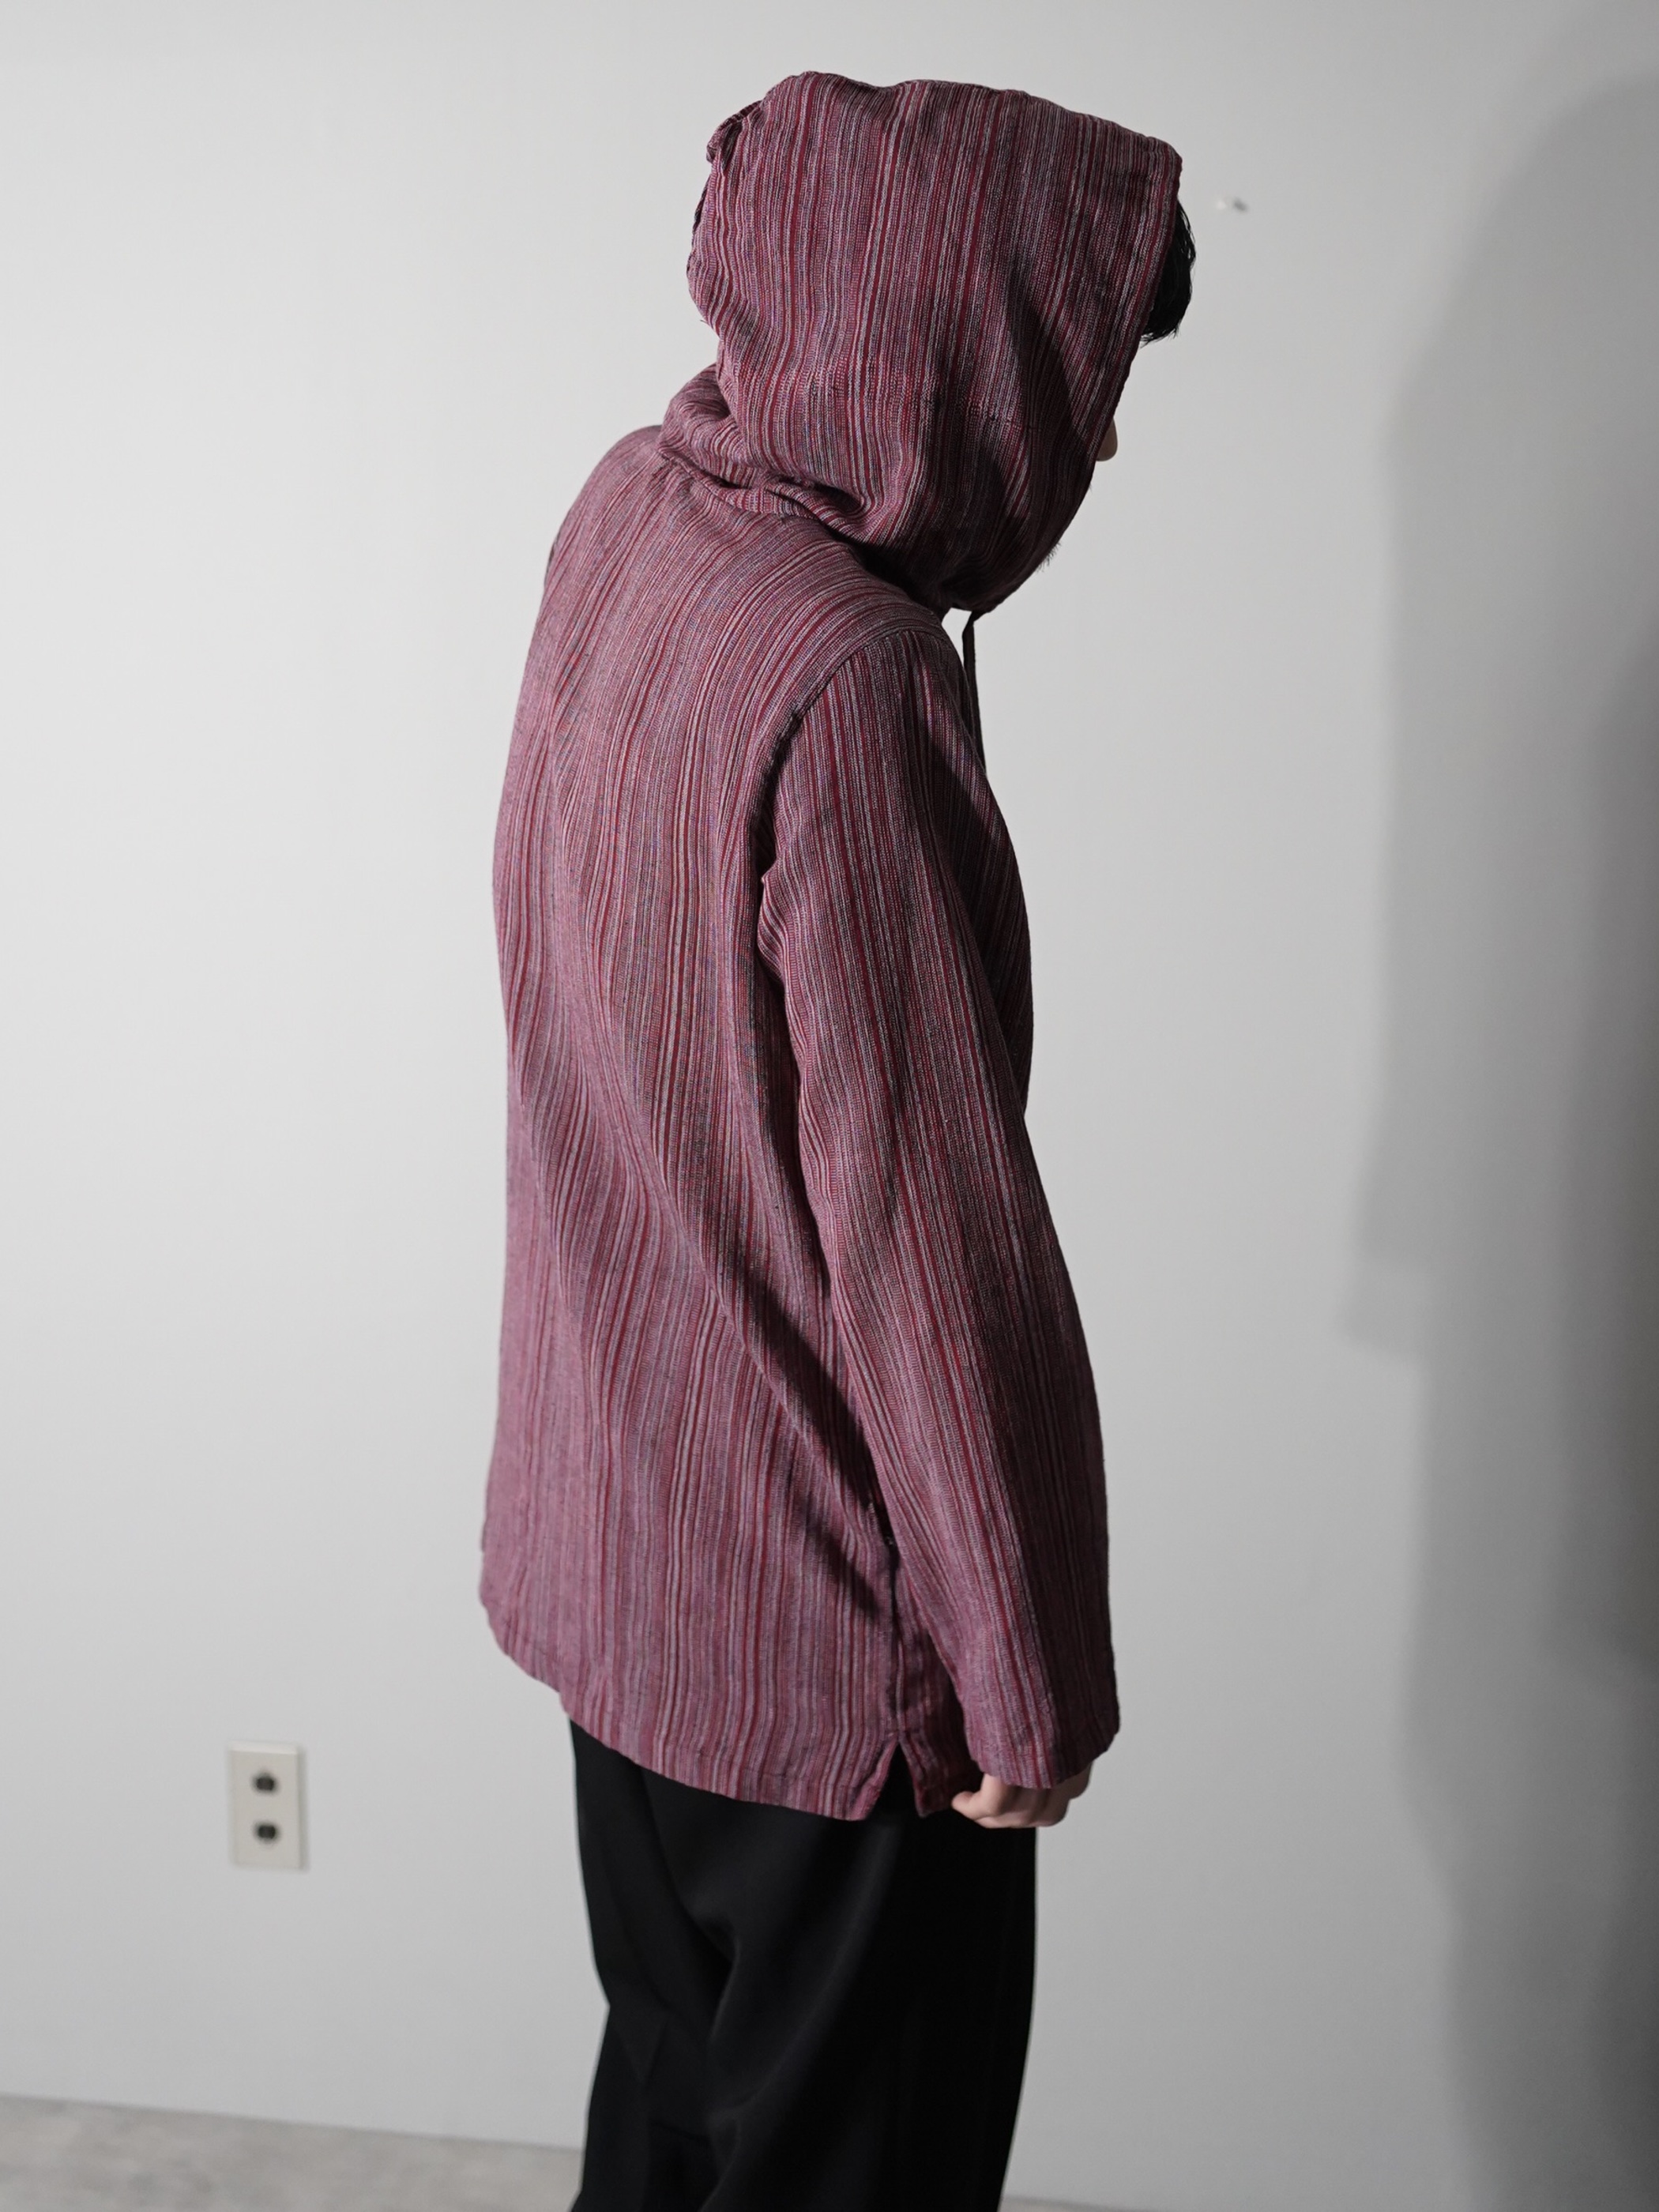 EARTHBOUND shirt fabric cotton hoodie / Made in India